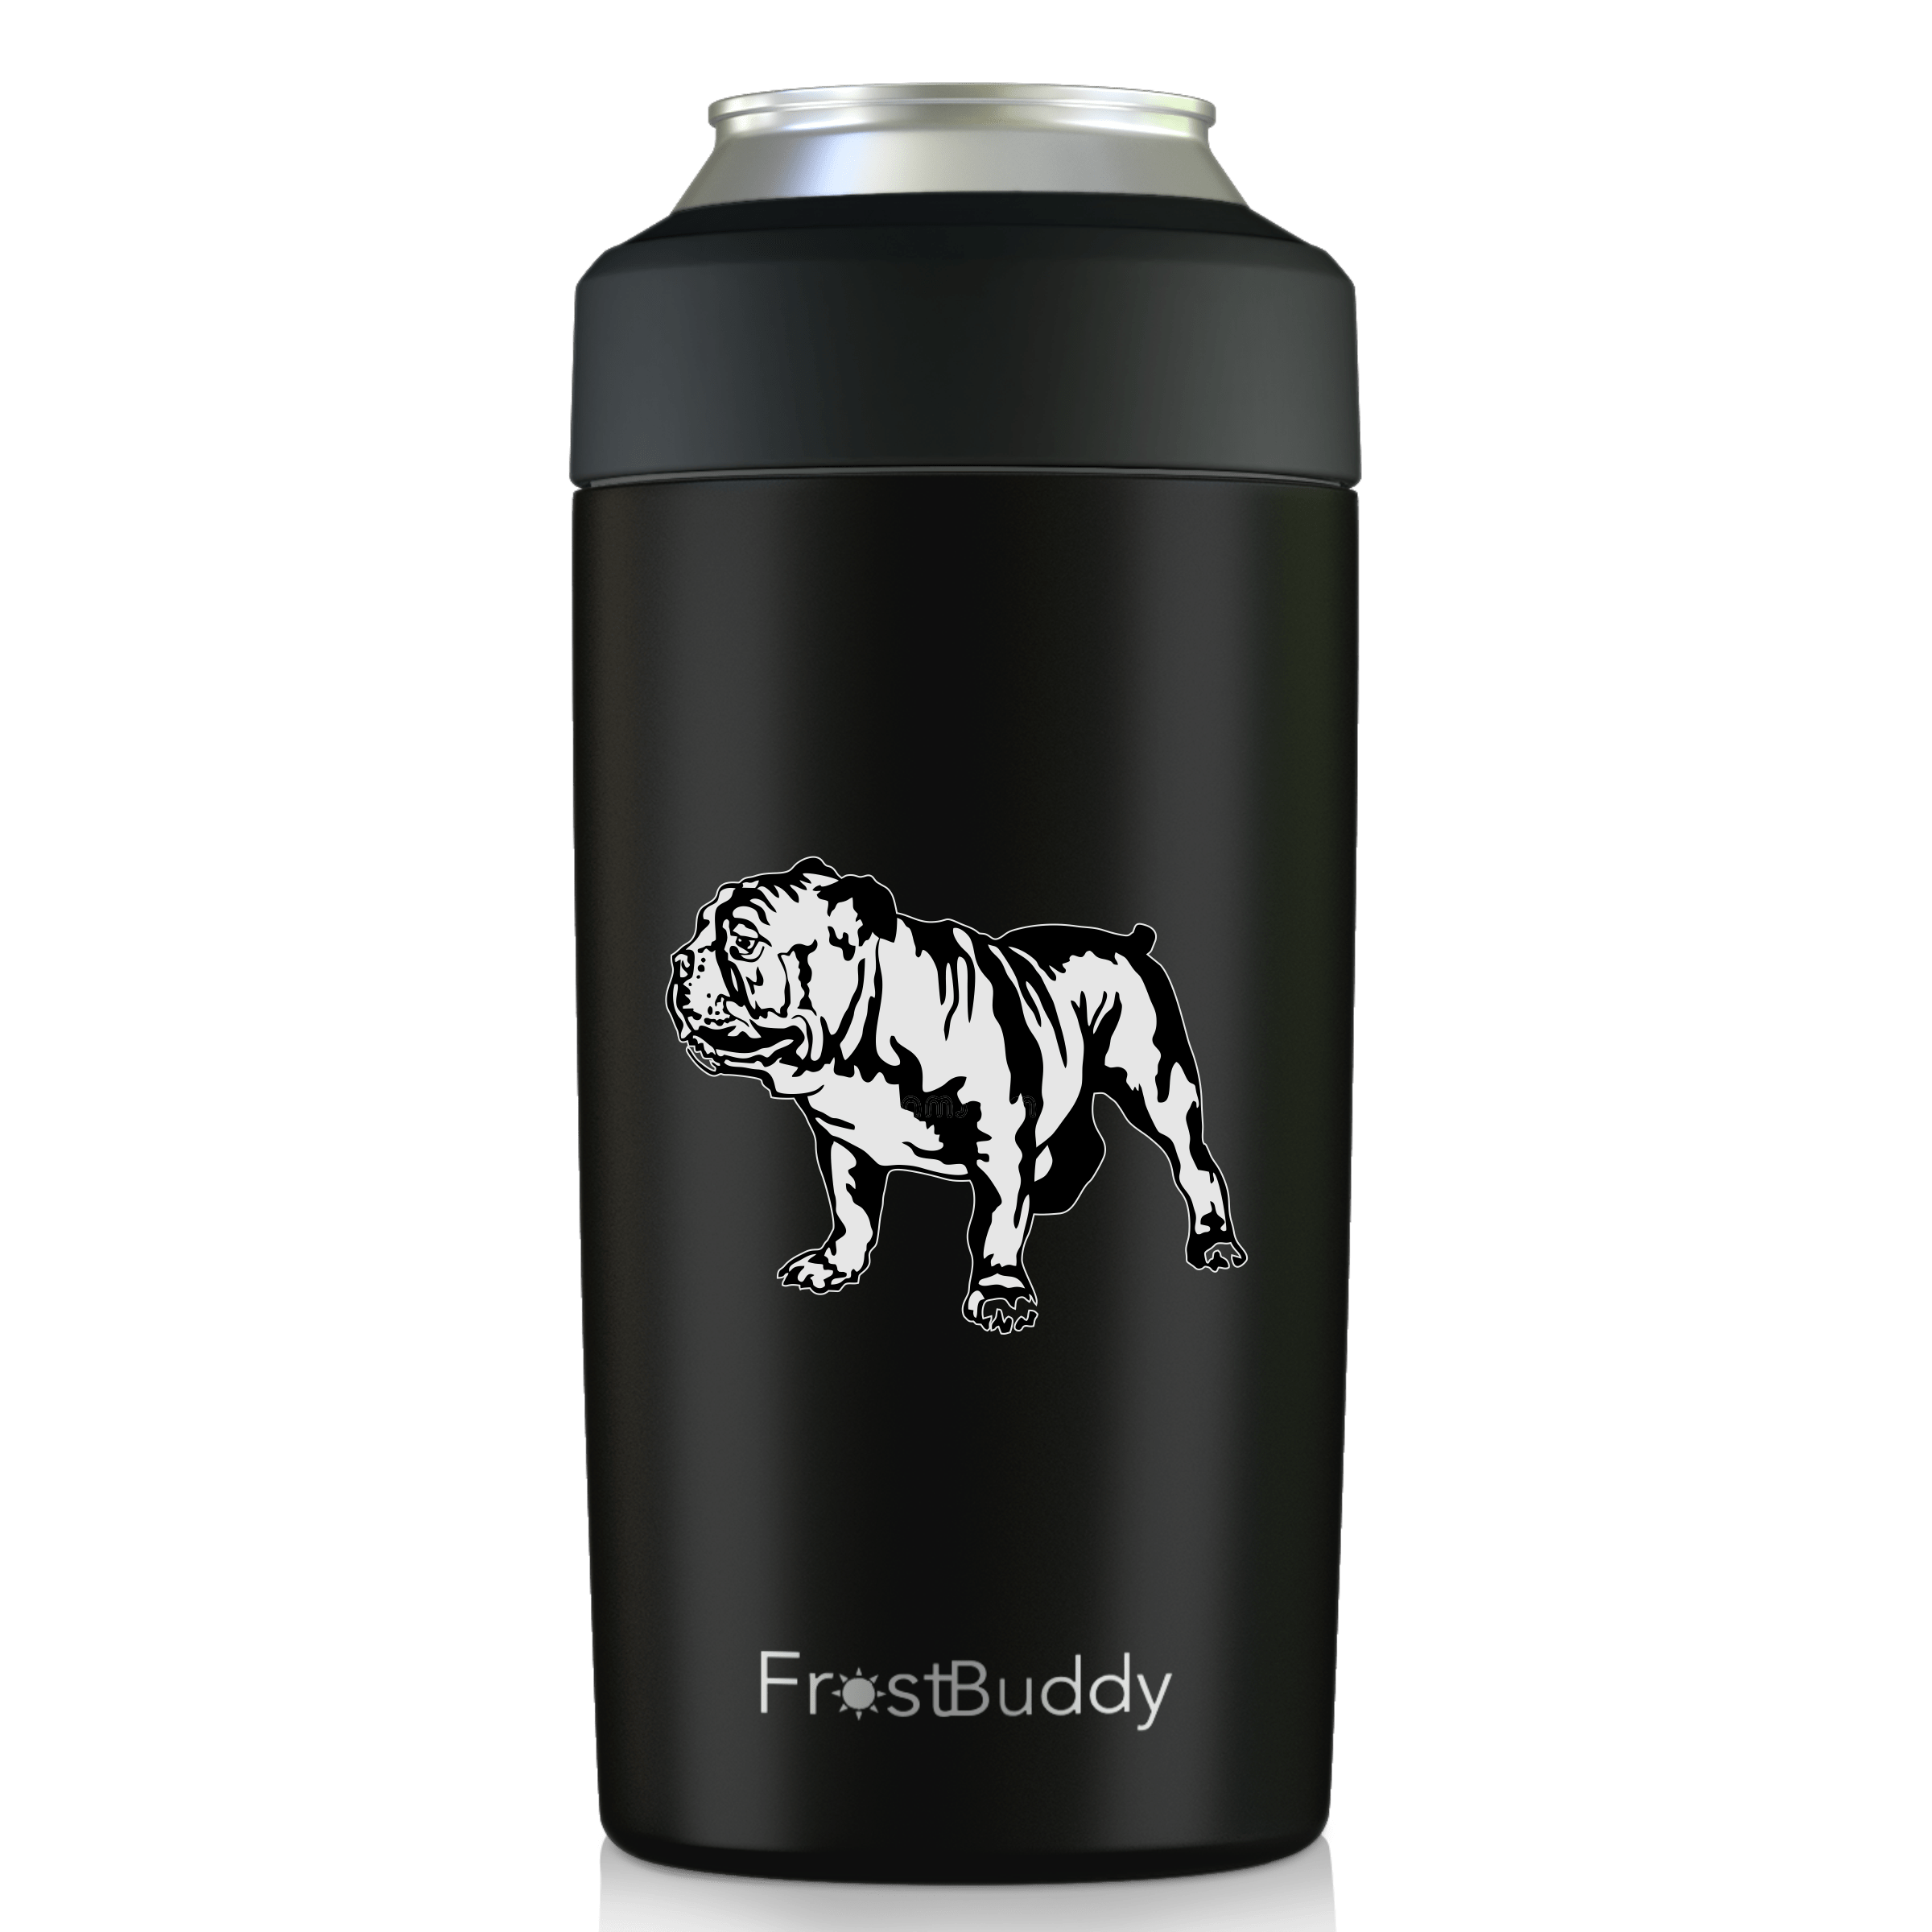 Frost Buddy Universal Buddy 2.0 Can Cooler